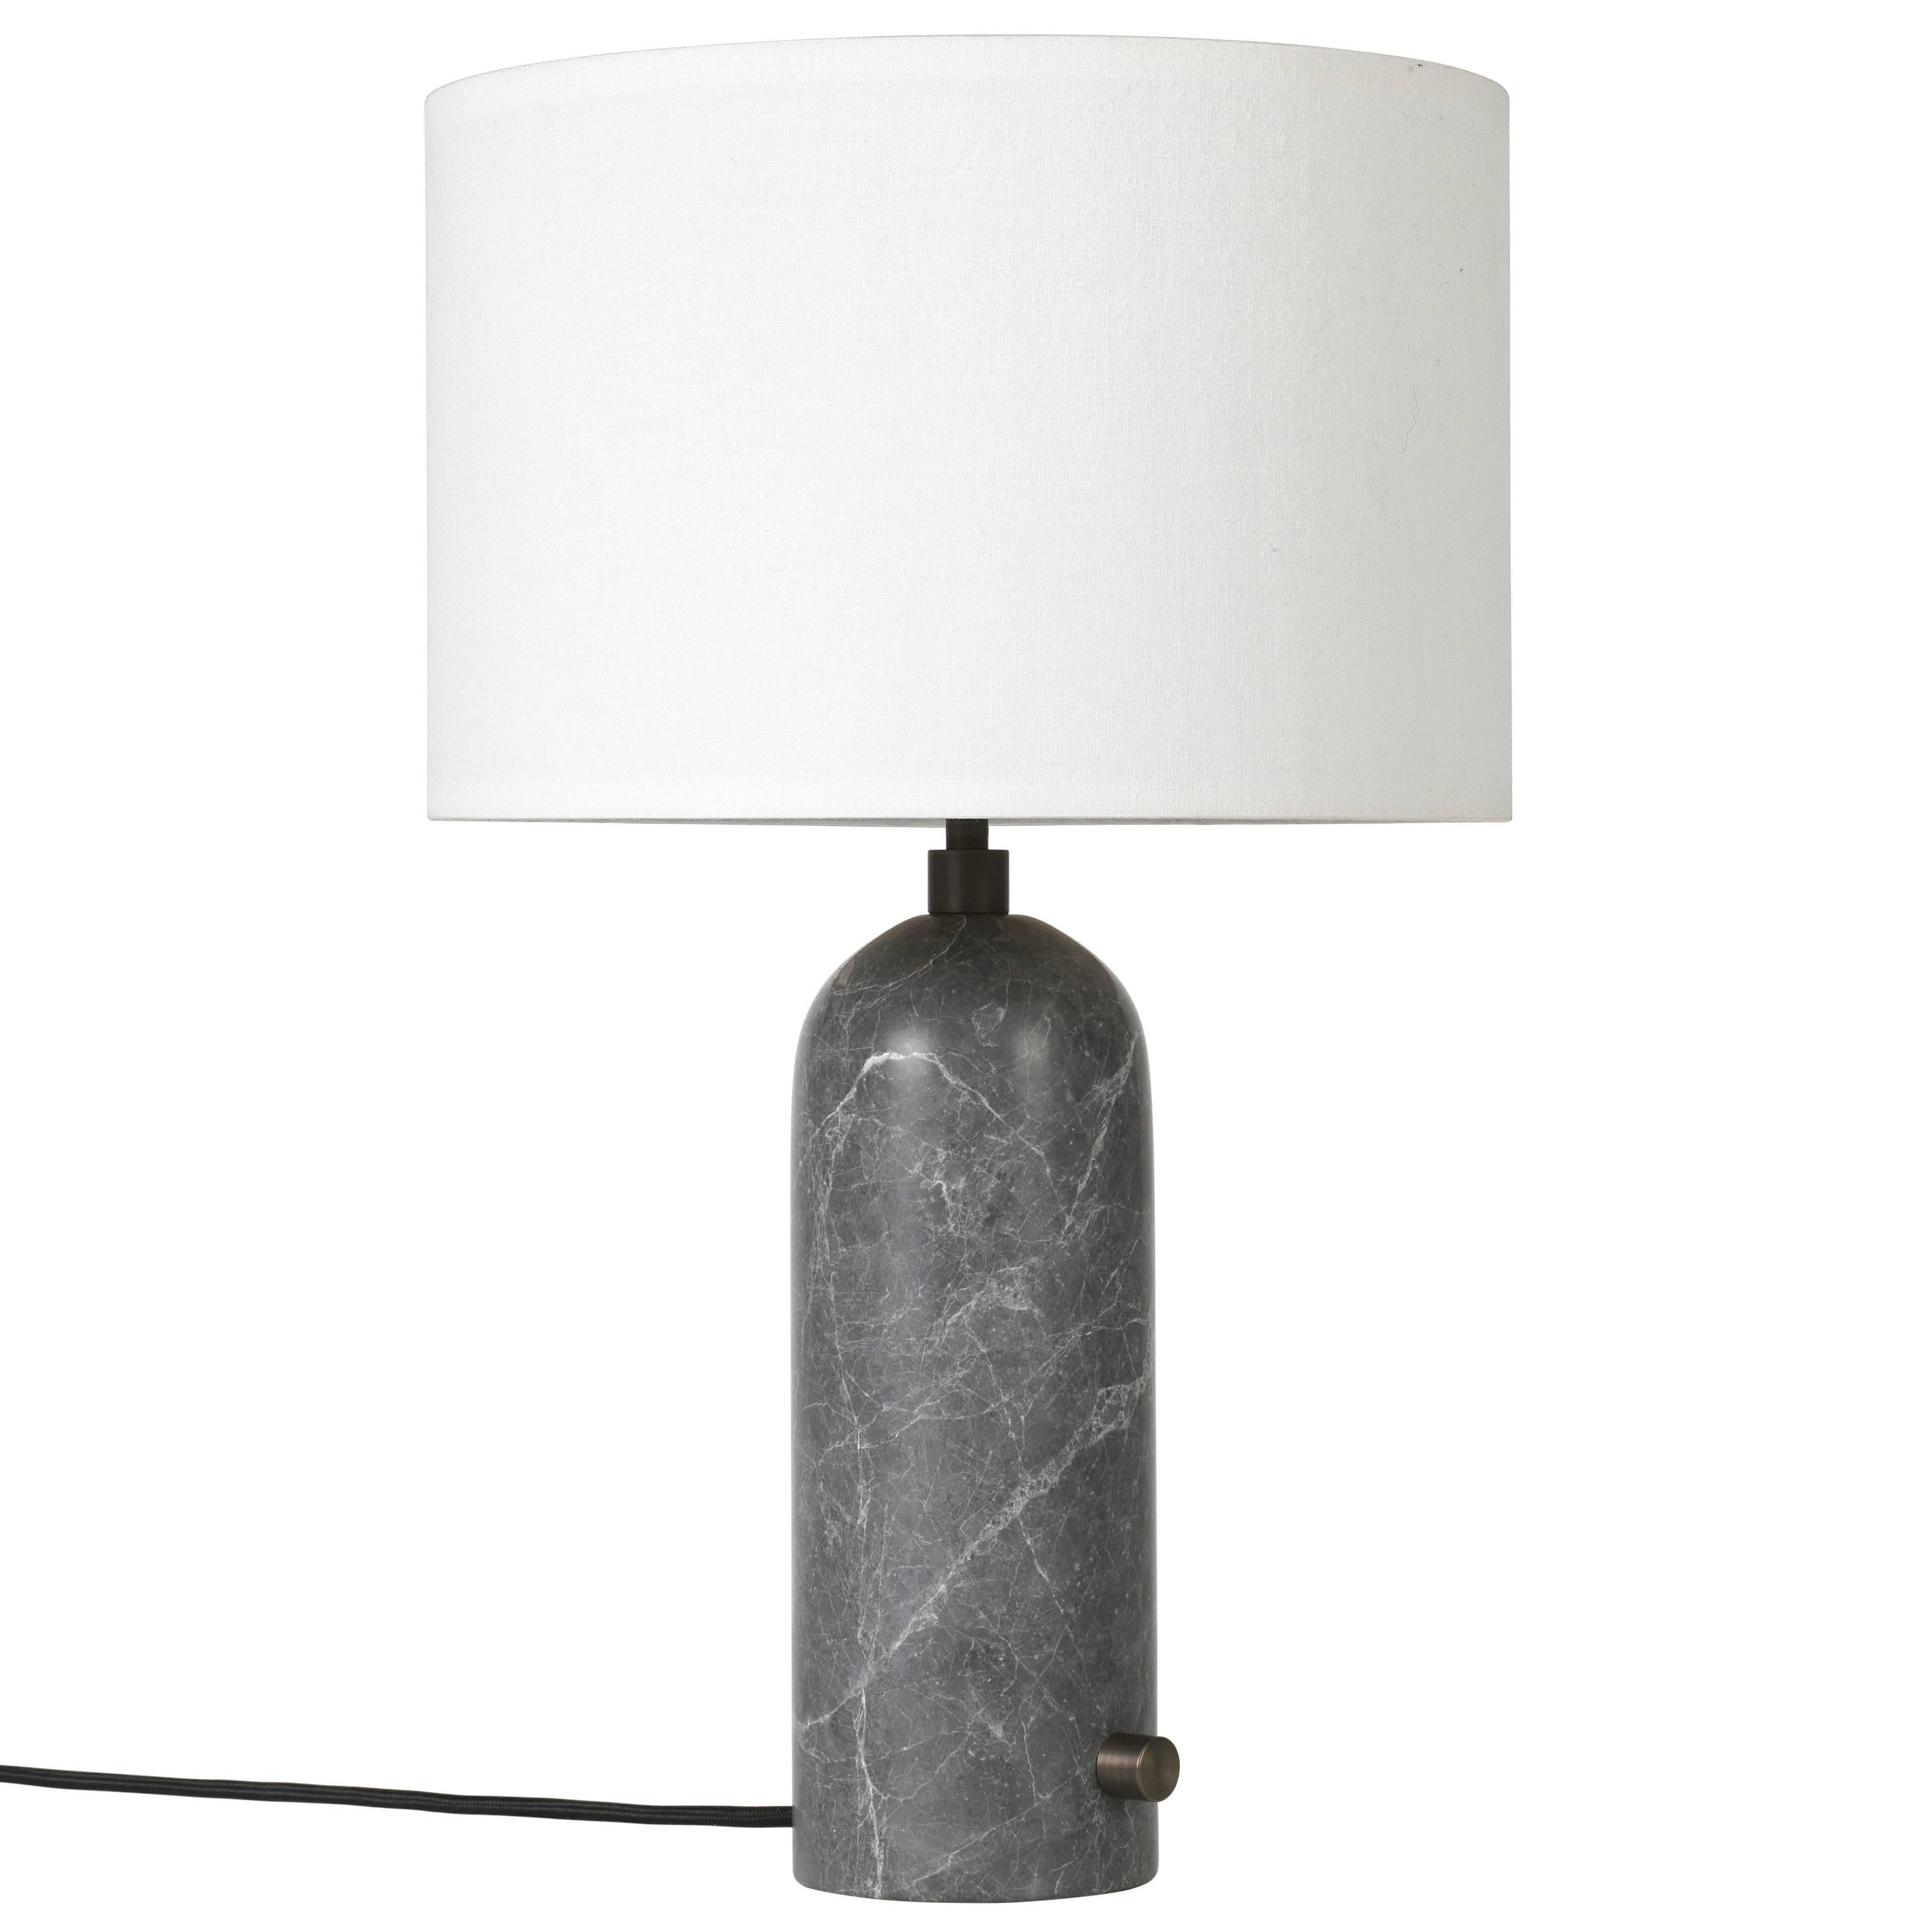 'Gravity' Grey Marble Table Lamp